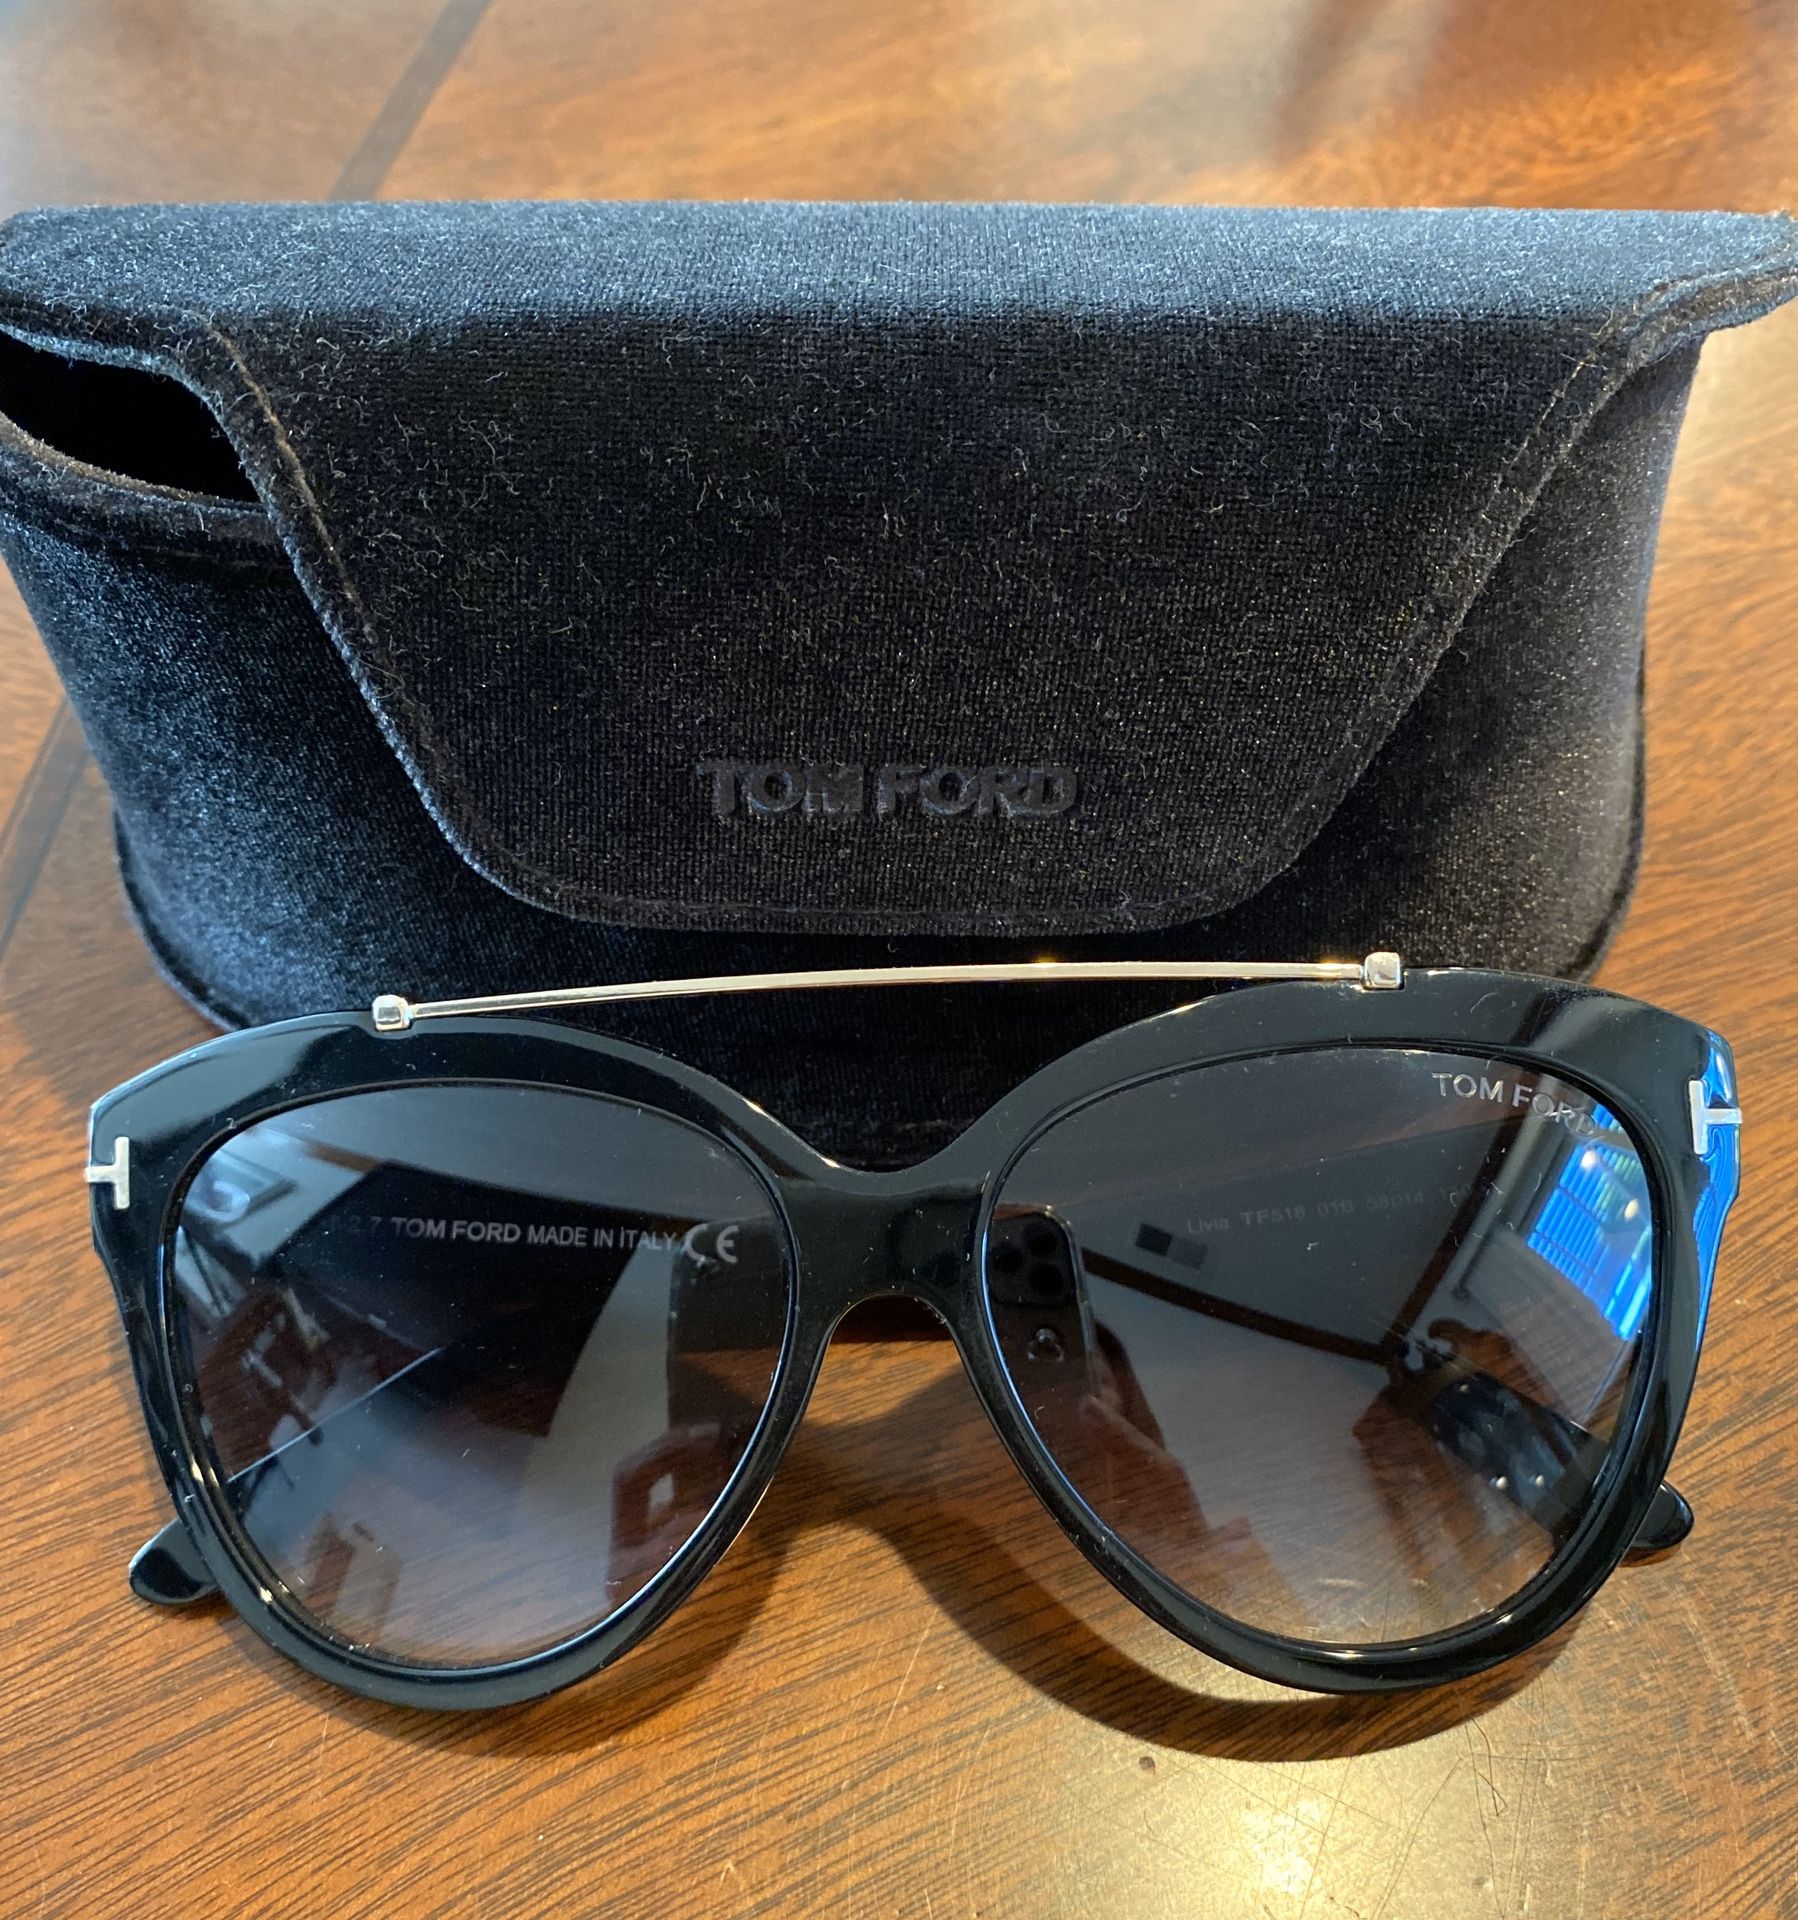 100% authentic Tom Ford sunglasses😎